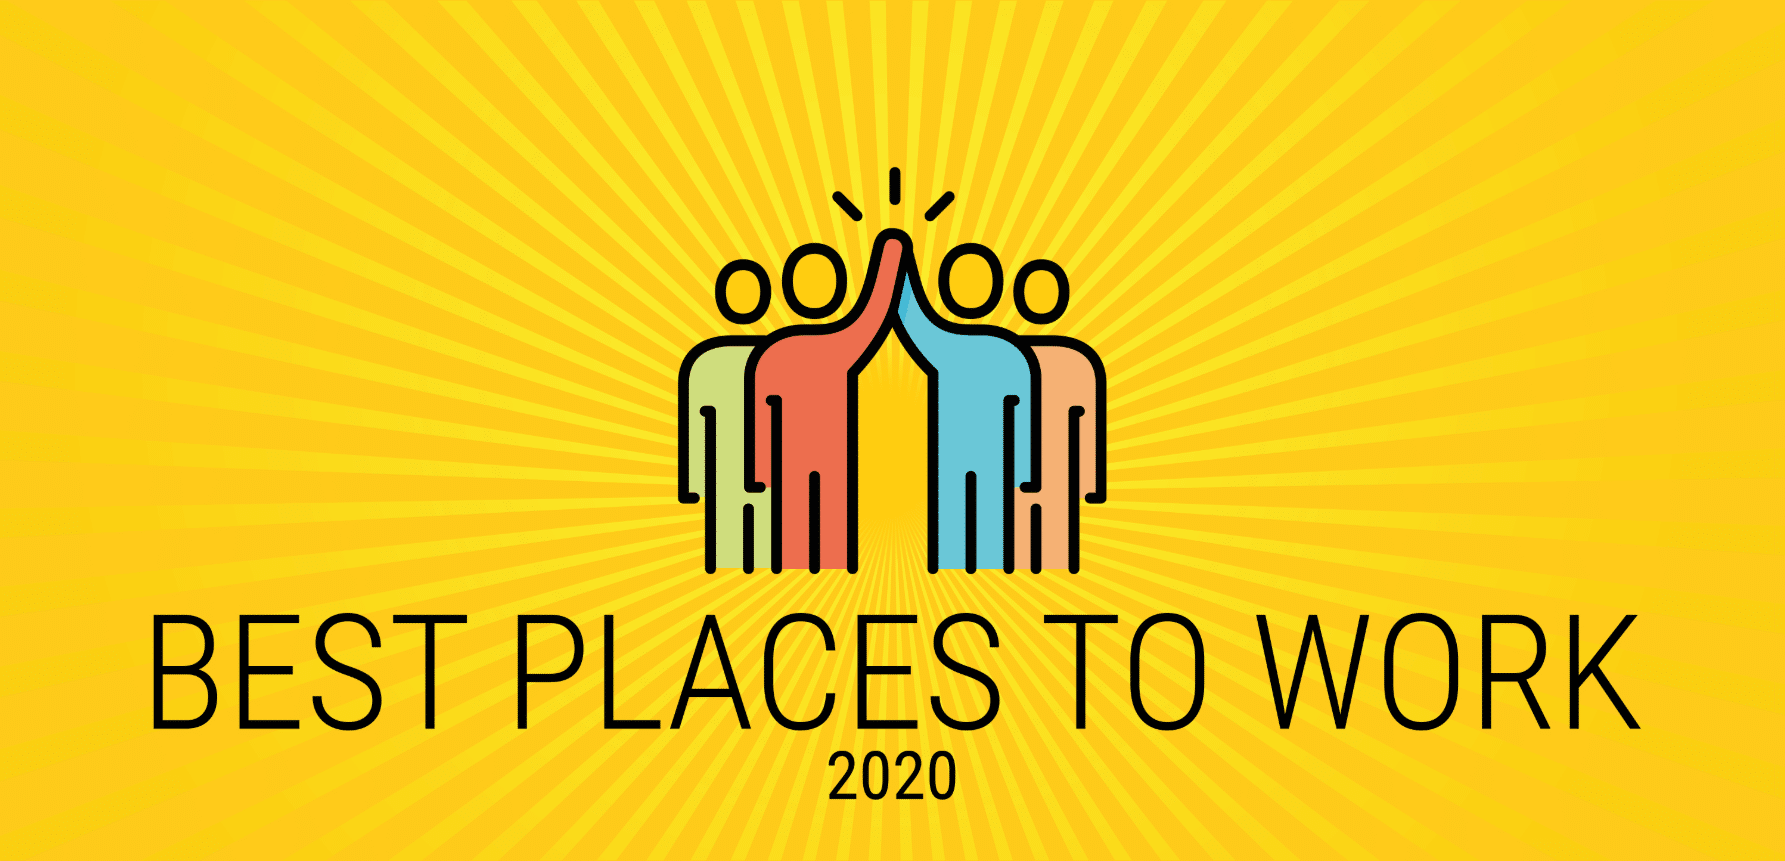 crains best places to work 2020 - IPM - Integrated Project Management